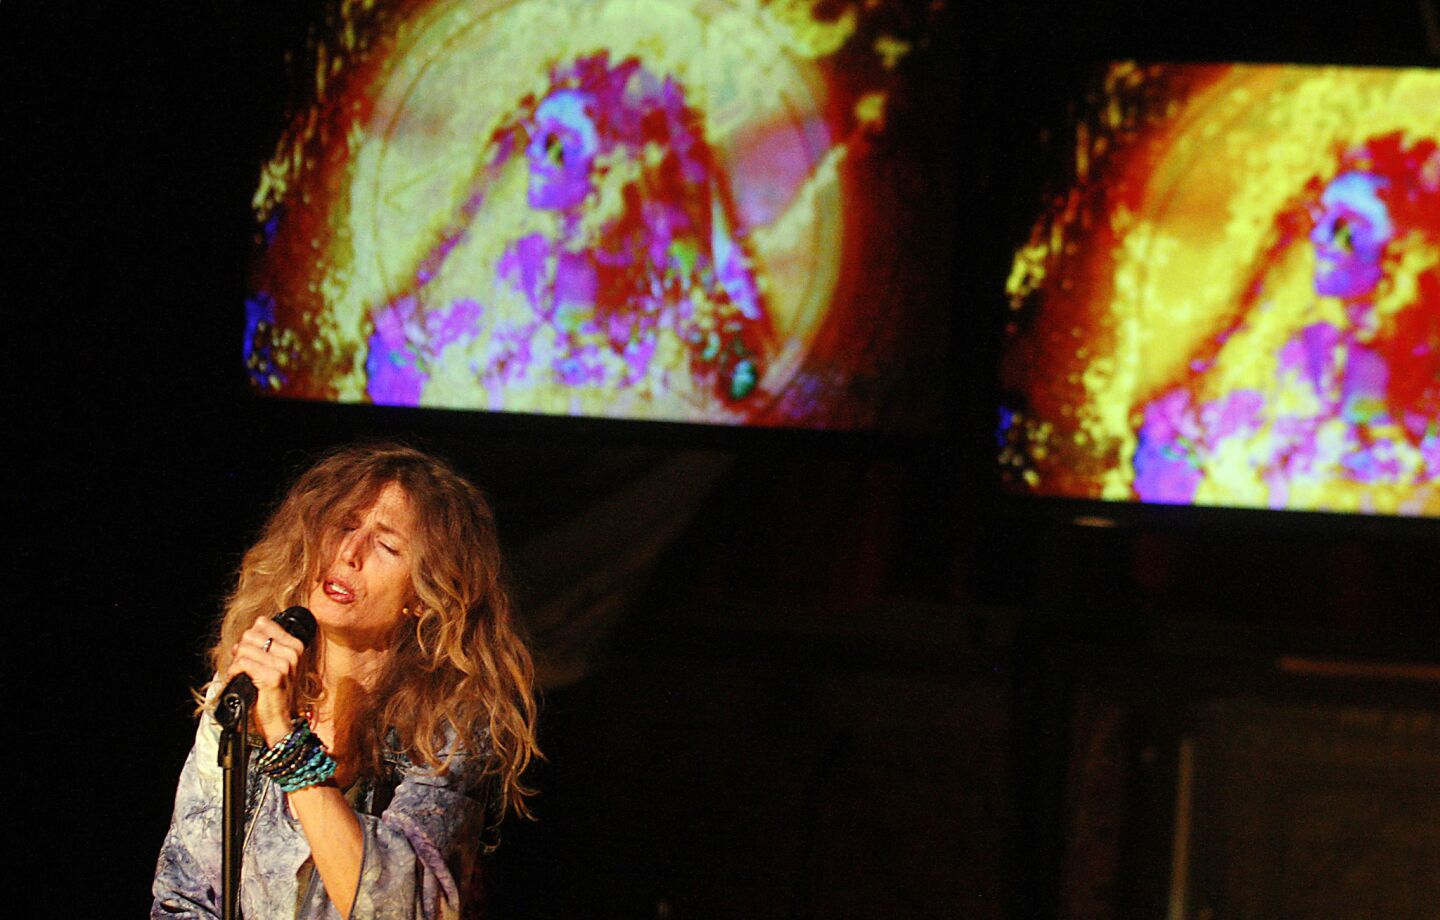 "Room 105: The Highs and Lows of Janis Joplin" by Gigi Gaston at Macha Theatre stars Sophie B. Hawkins as Janis Joplin. It's an intense connection.More: Sophie B. Hawkins channels Janis Joplin's spirit in 'Room 105'